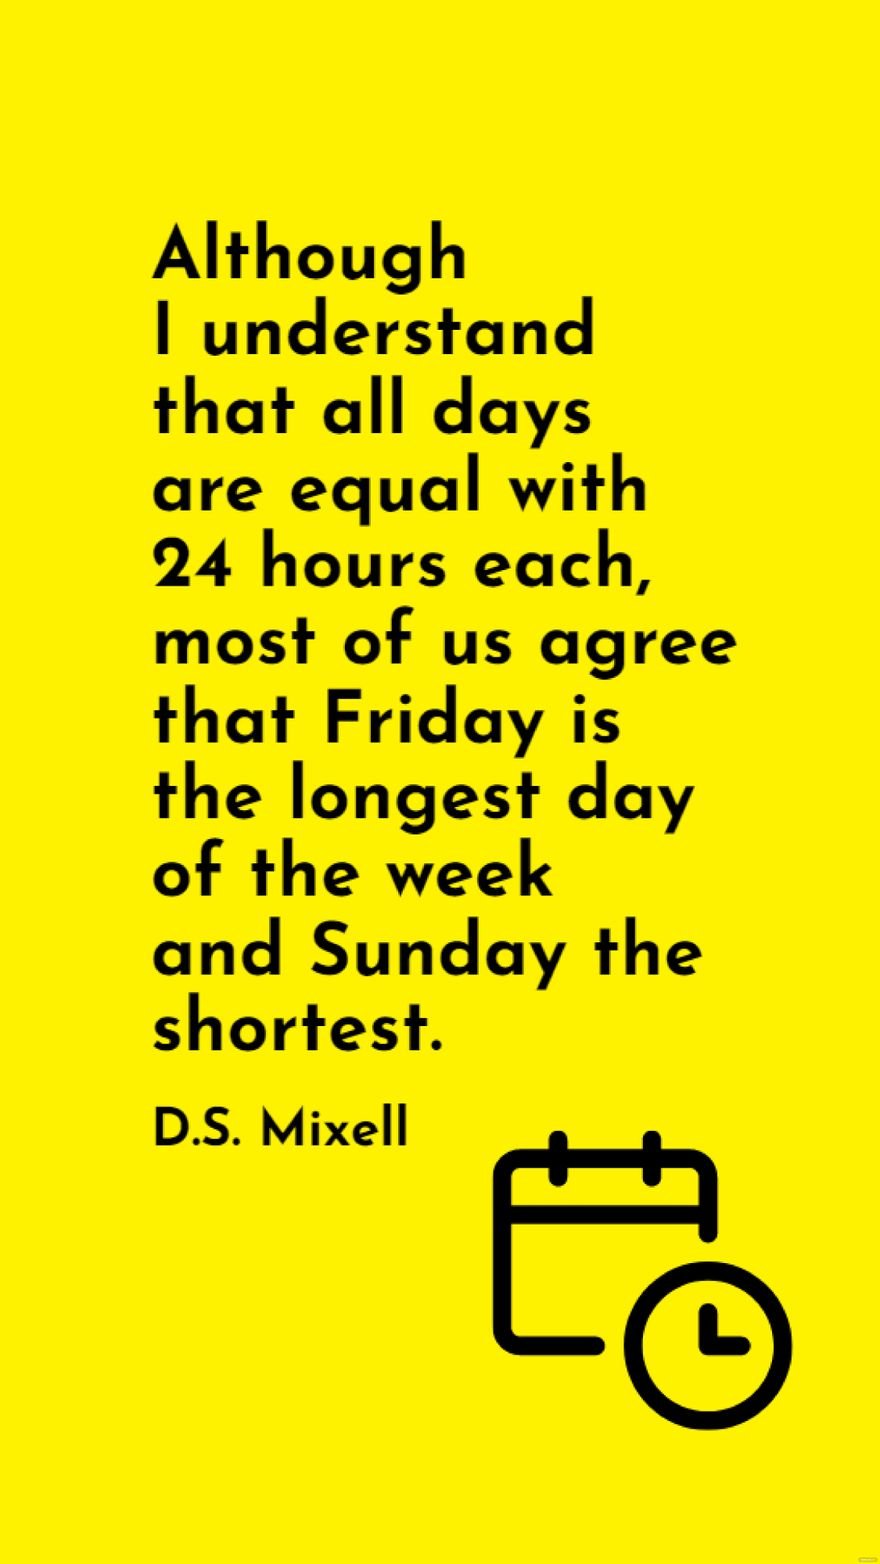 D.S. Mixell - Although I understand that all days are equal with 24 hours each, most of us agree that Friday is the longest day of the week and Sunday the shortest. in JPG